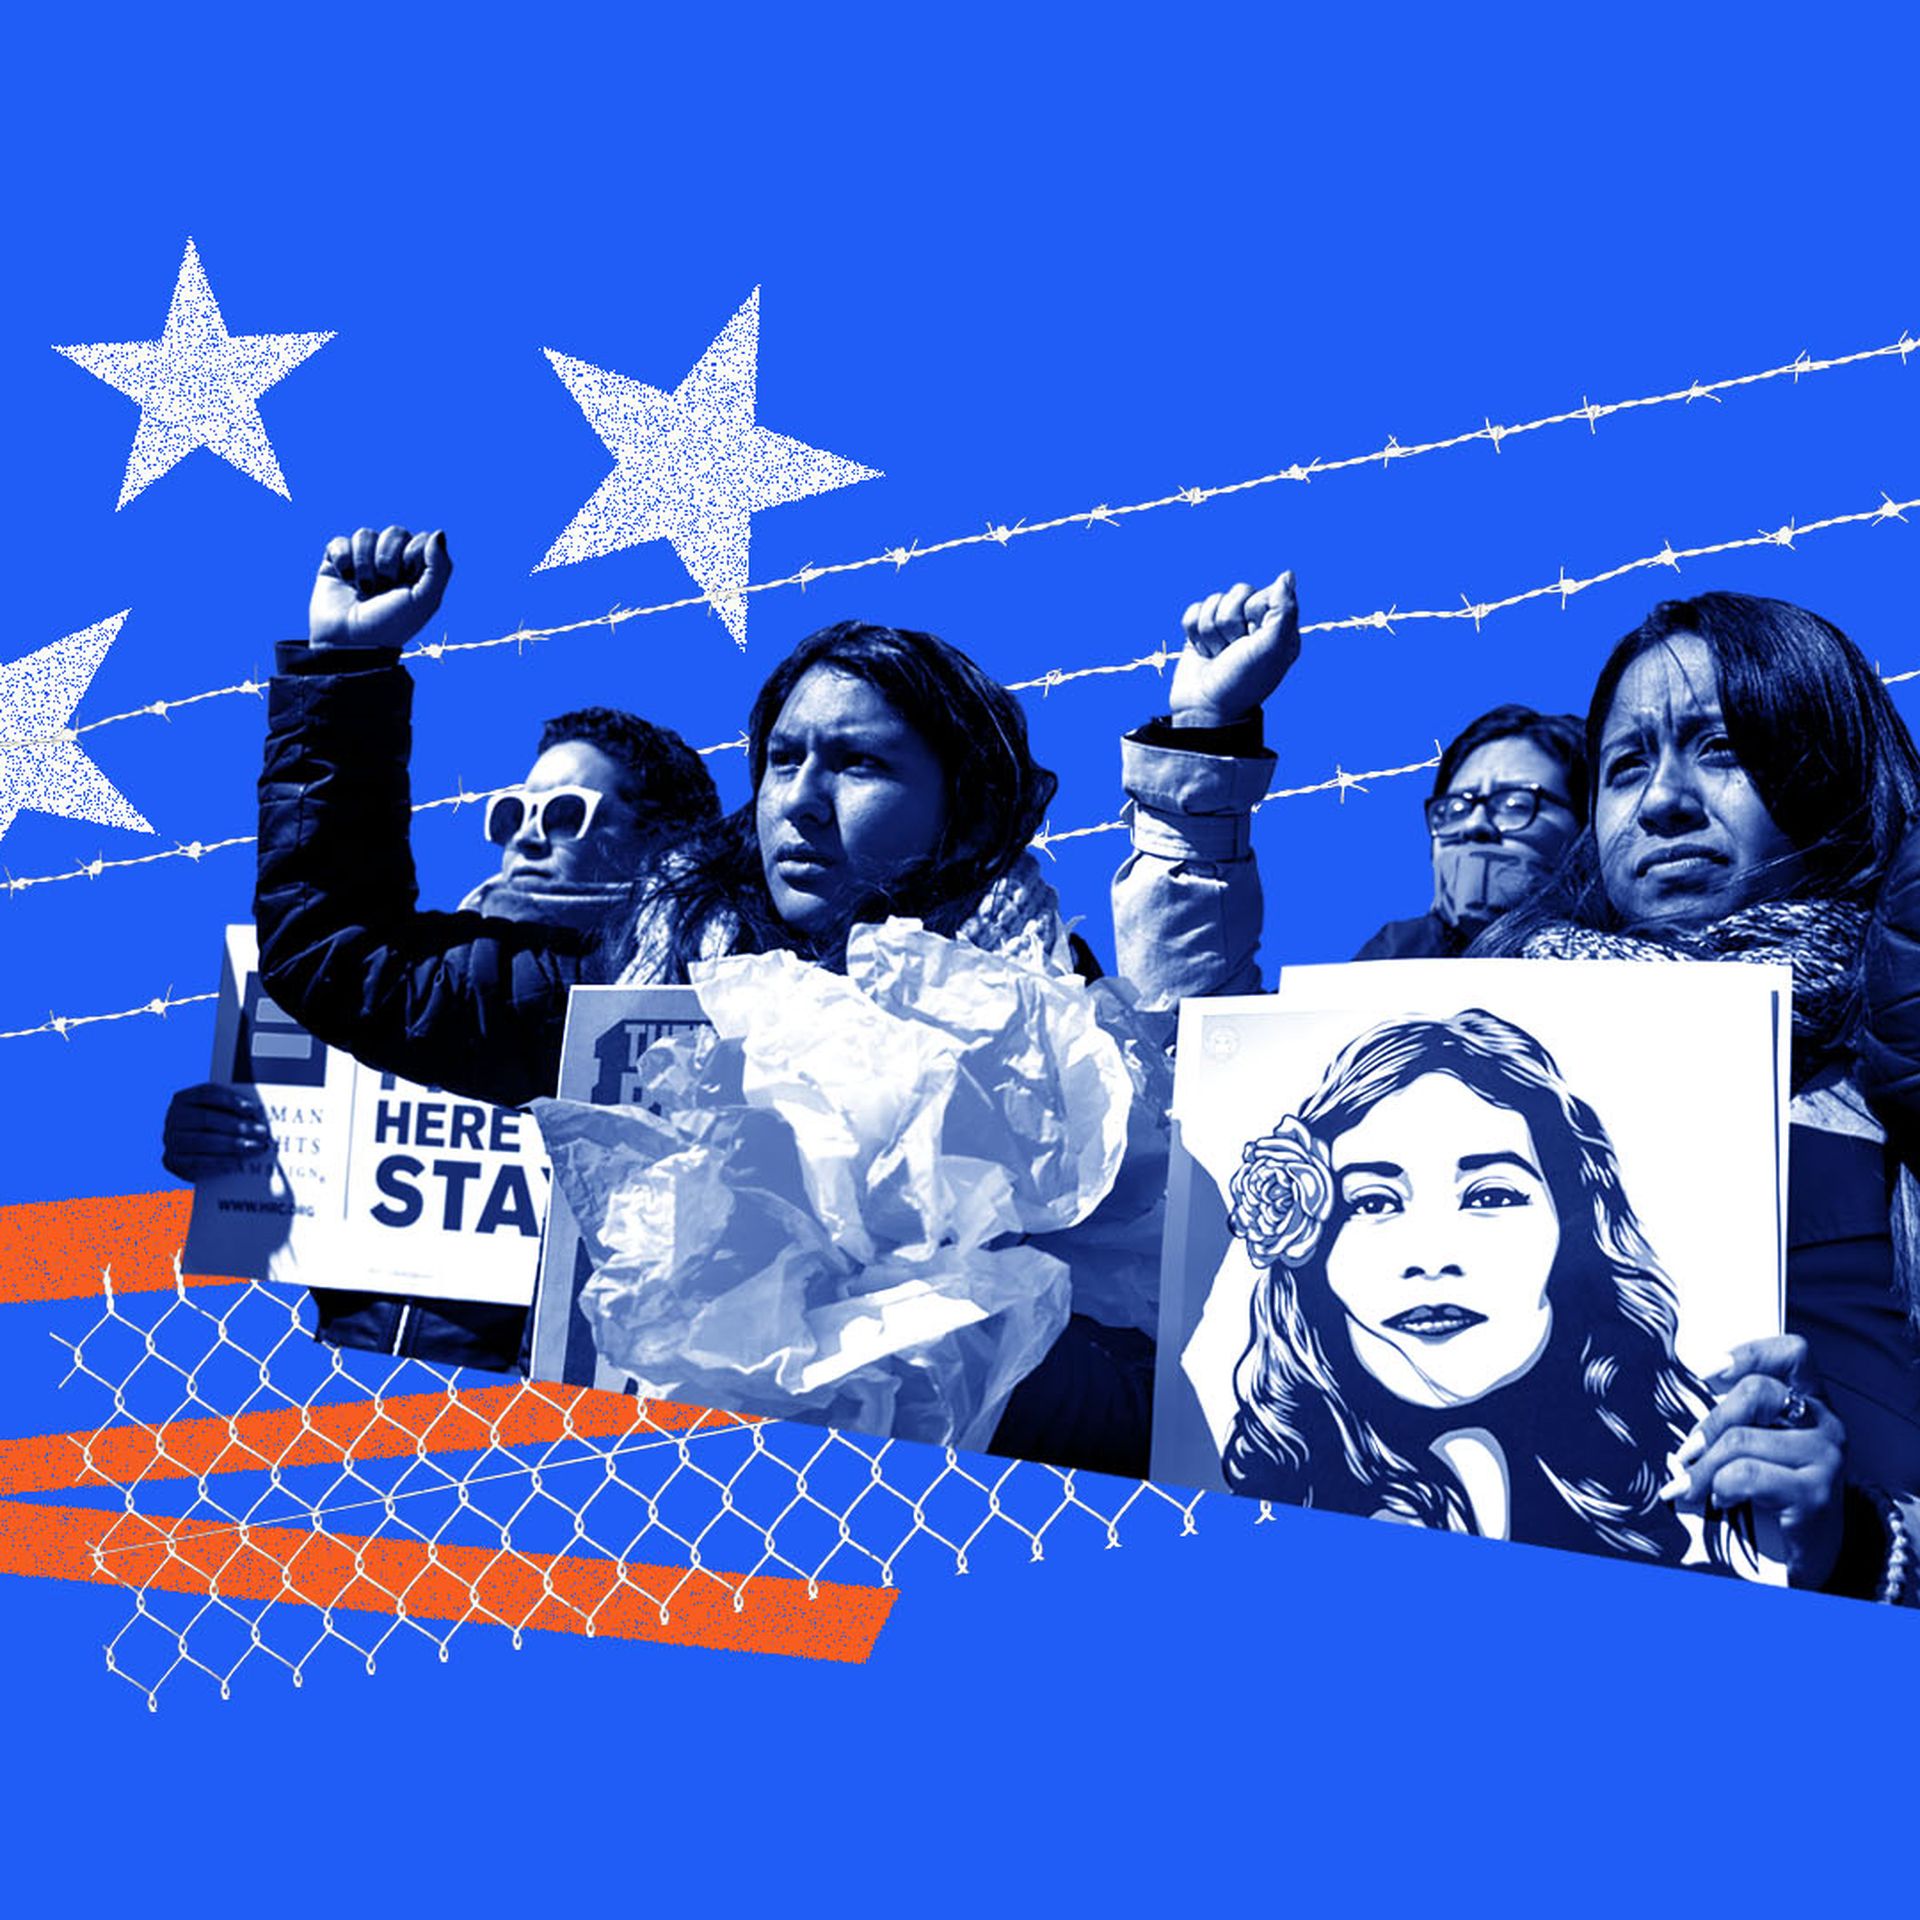 Photo illustration of demonstrators protesting DACA, with a barbed wire fence in the background, and stars and stripes referencing the U.S. flag